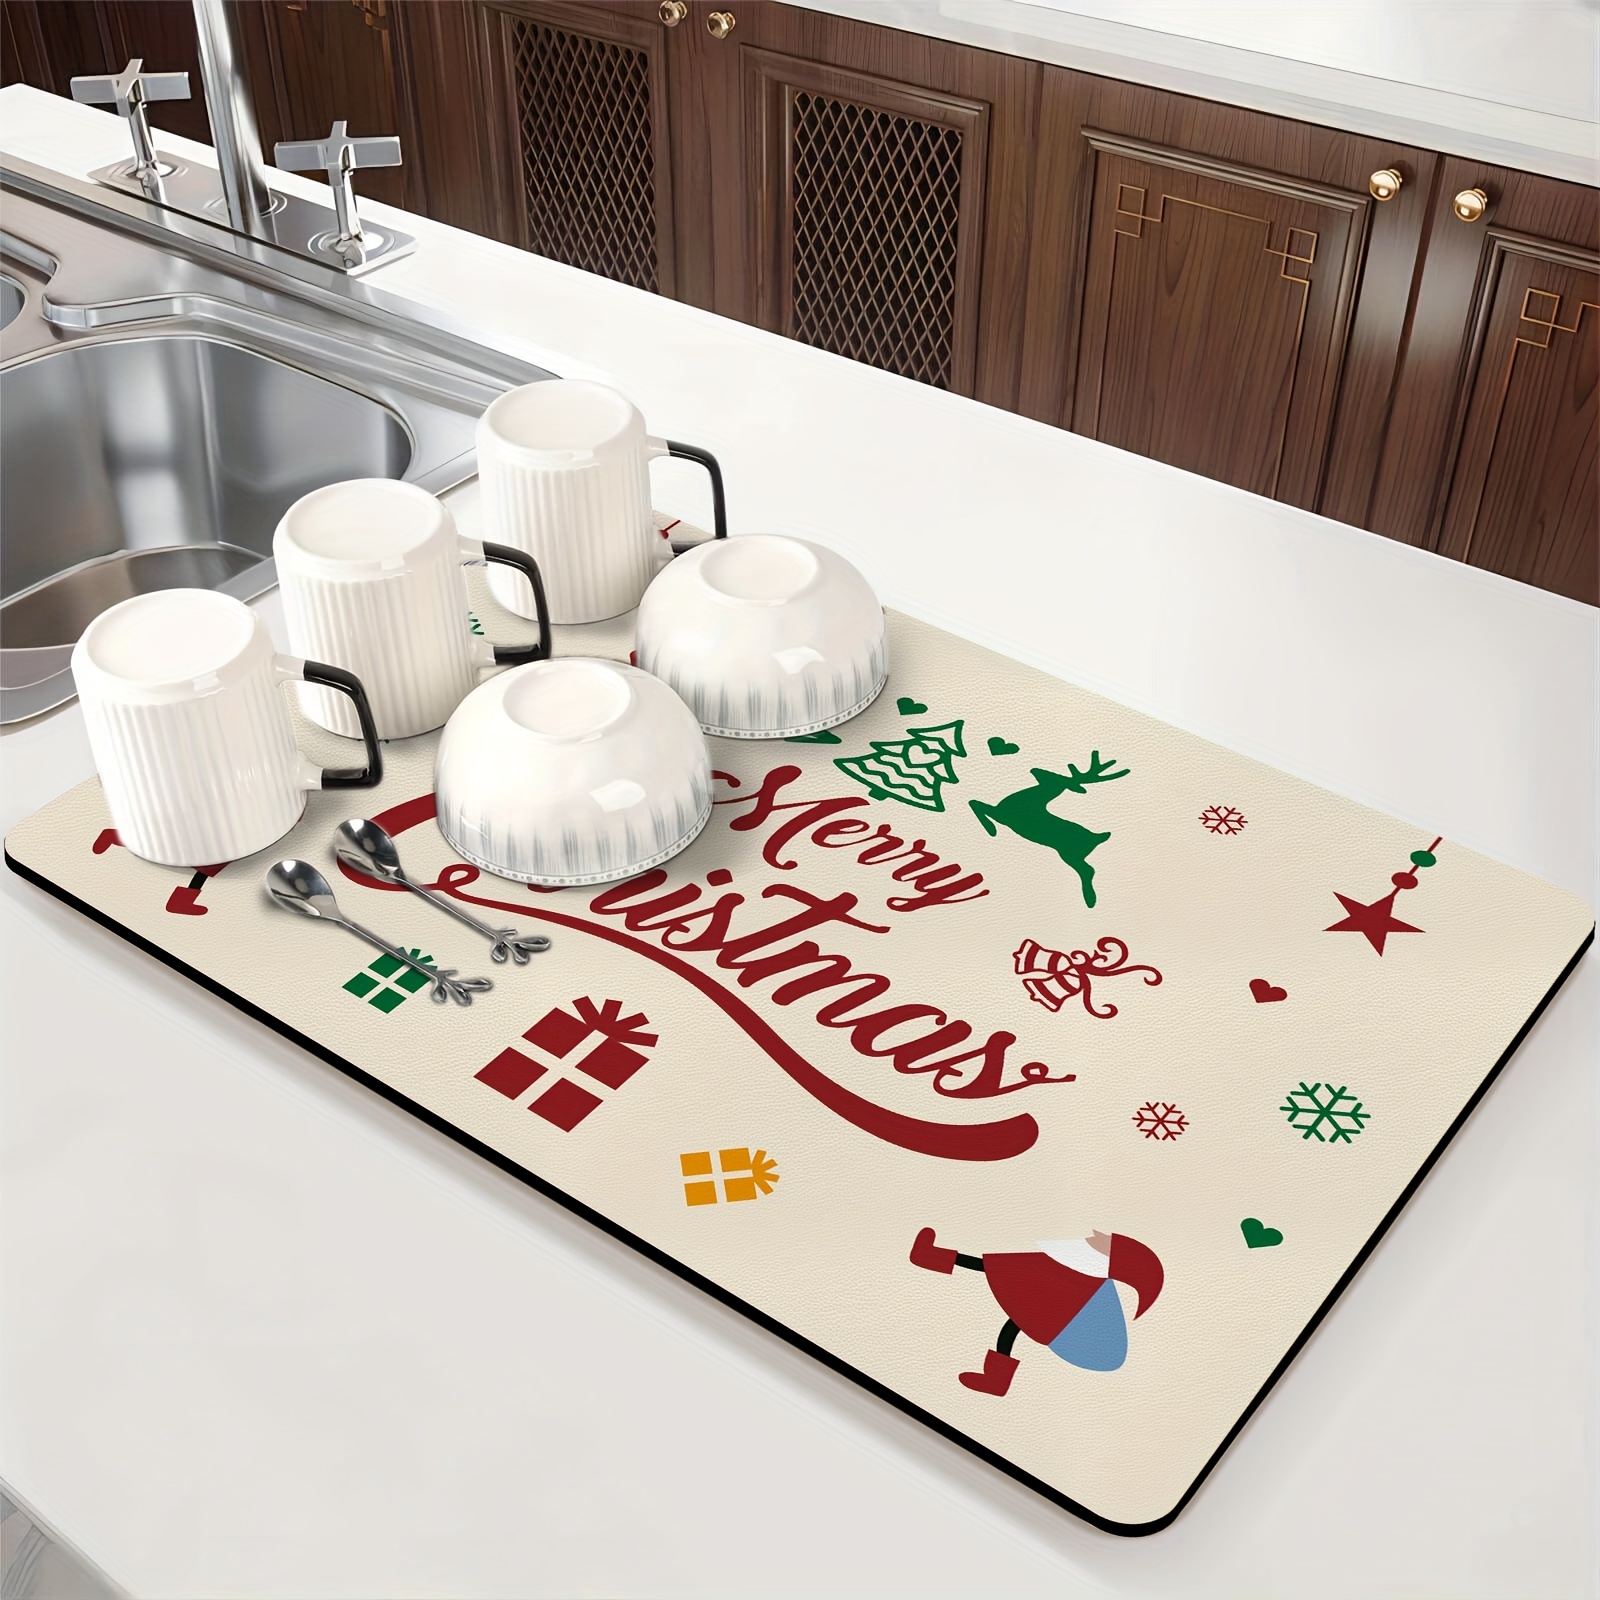 Mat Stain Absorbent Dish Drying Mat Kitchen Counter-Coffee Bar Accessories  Fit Under Coffee Maker Pot Espresso Machine Rack